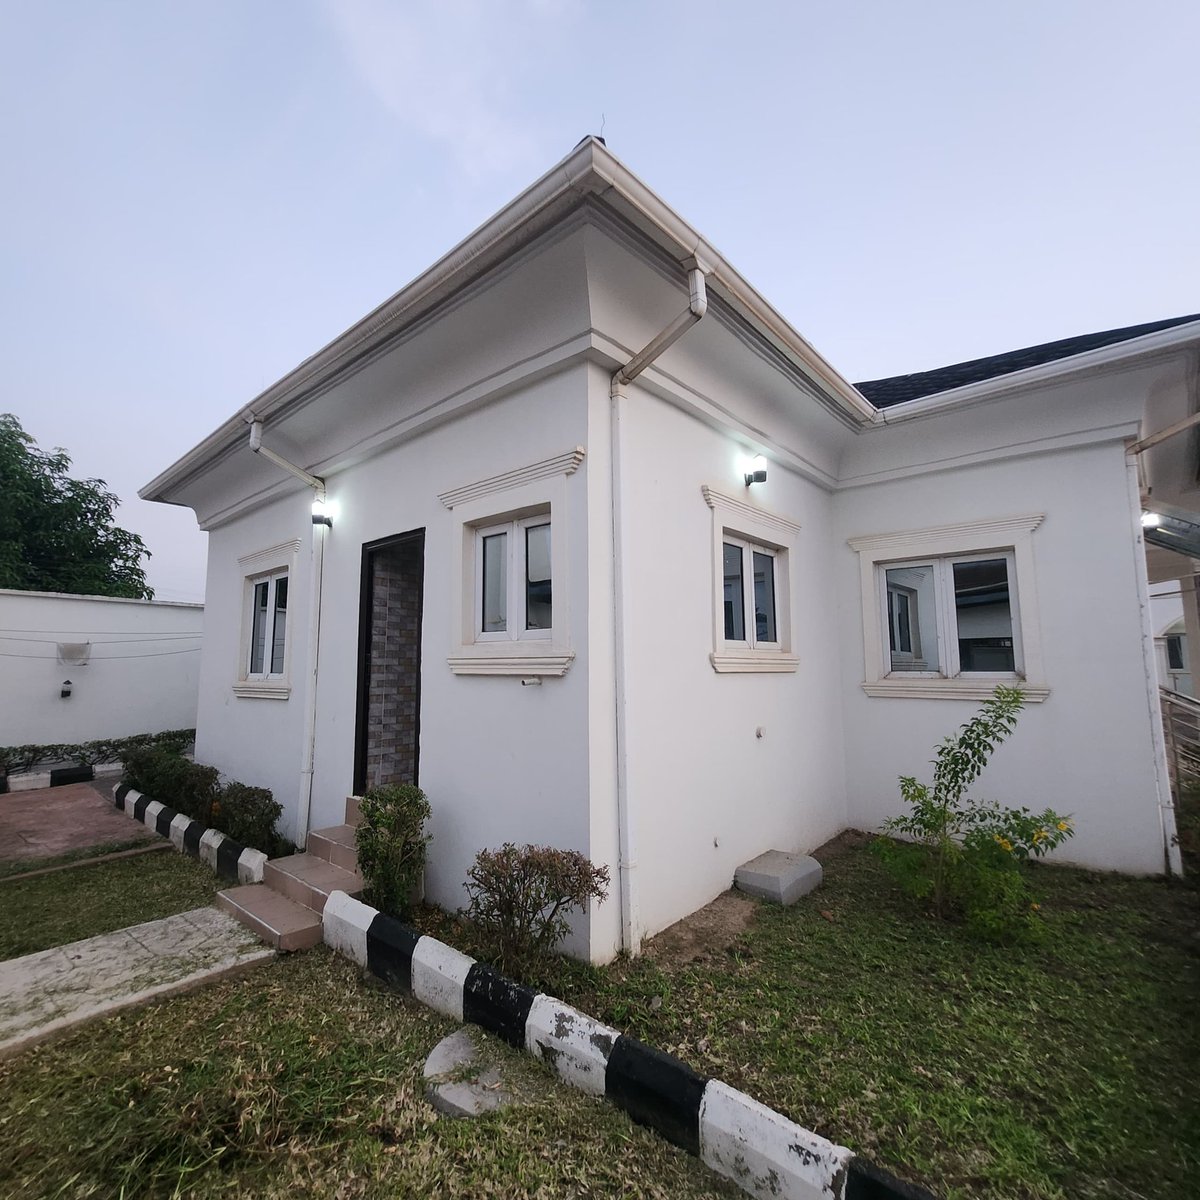 LETTING

3BEDROOM  BUNGALOW  TO LET IN KOLAPO  ISHOLA  GRA 

RENT: 3M

Just 2 IN A COMPOUND  & MUSLIM TENANT REQUESTED

Enquires
08062111053

#ibadan #ibadanagent